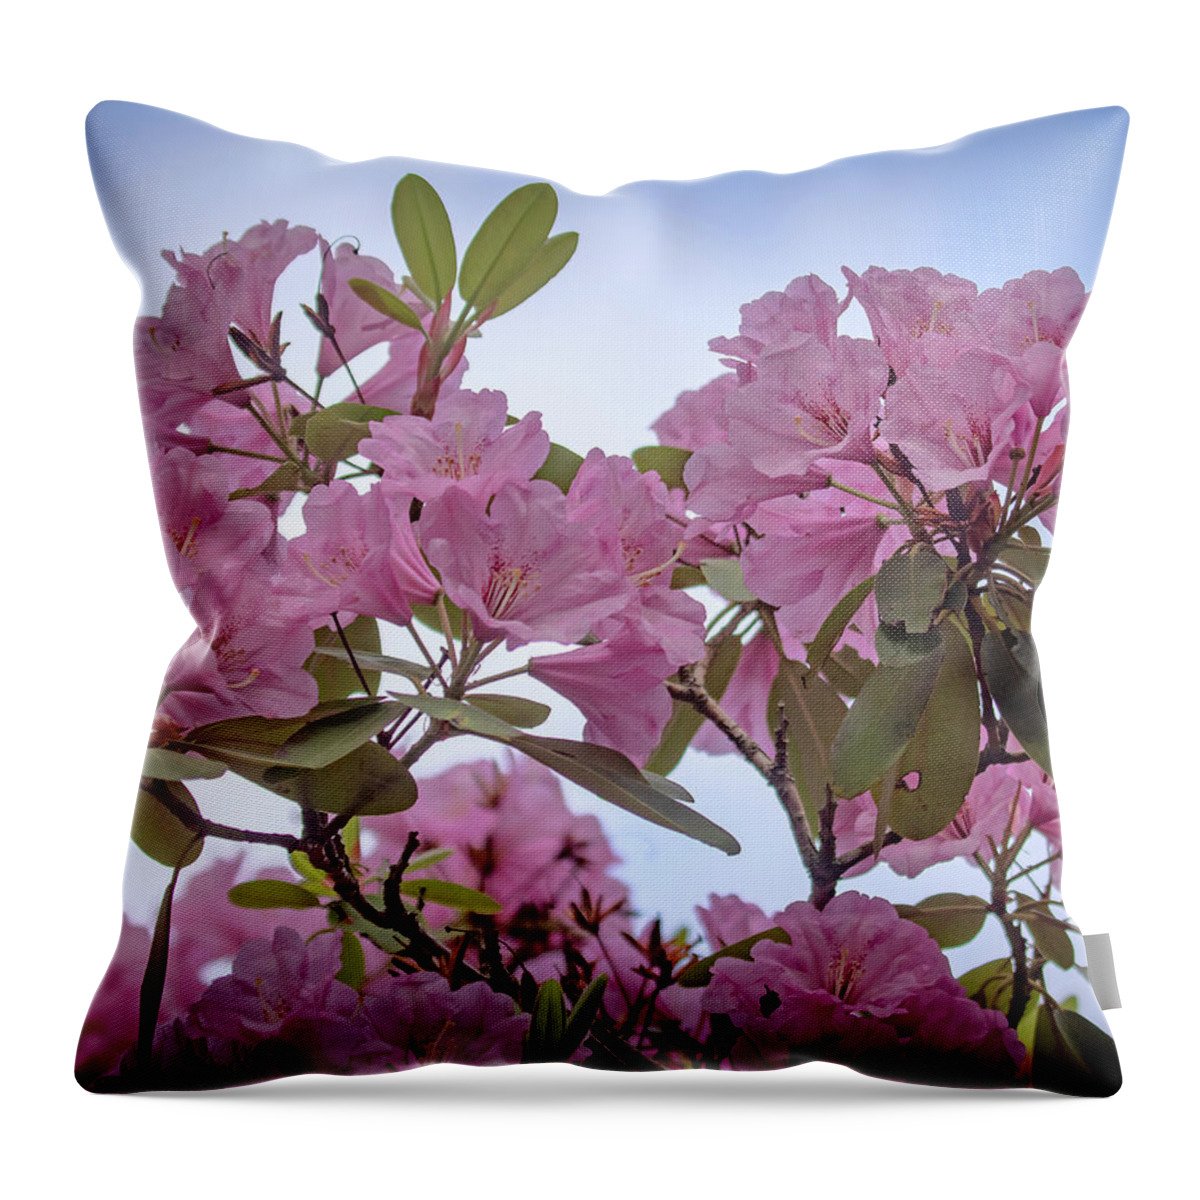 Rhododendron Throw Pillow featuring the photograph Cornell Botanic Gardens #6 by Mindy Musick King